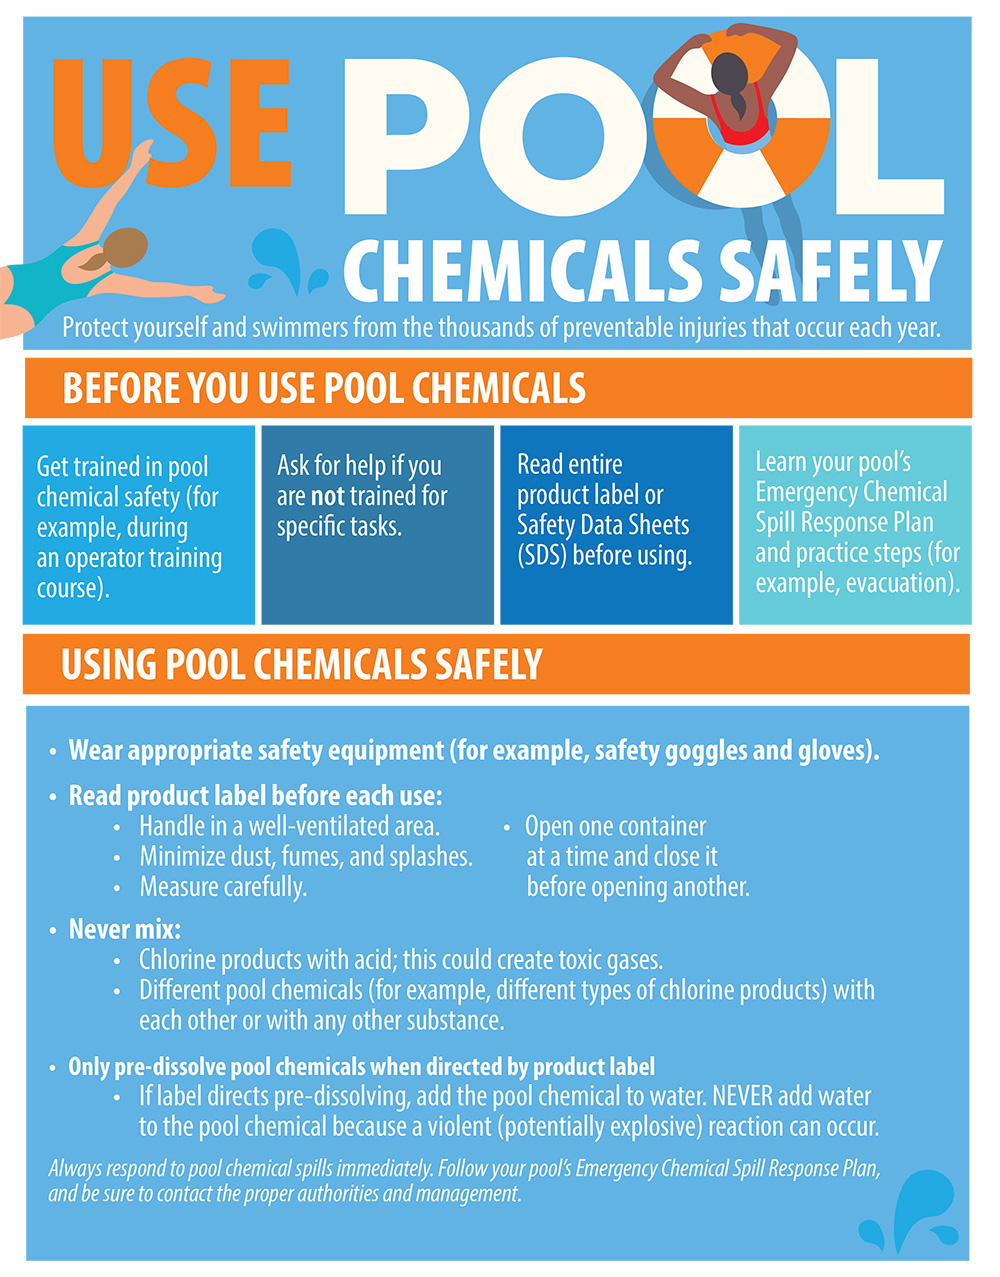 Pool-Chemical-Safety-USE-poster-p